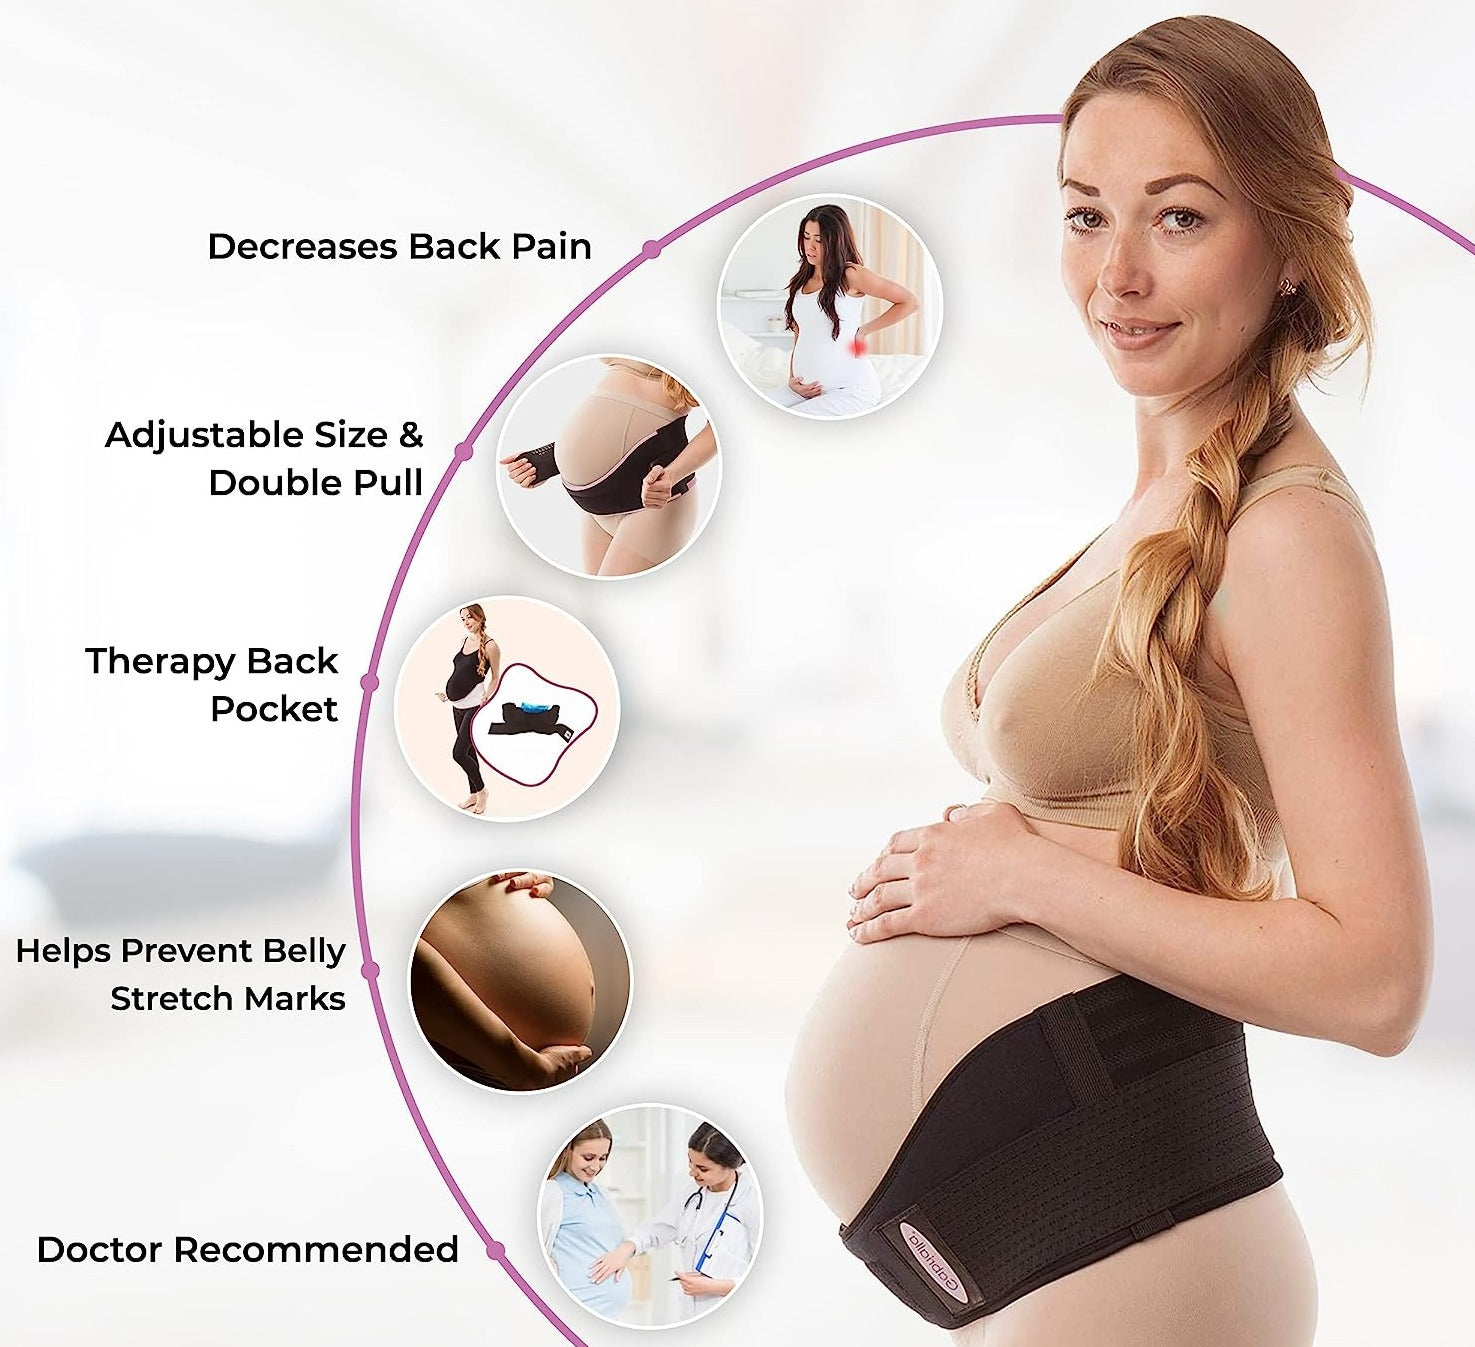 Maternity & Postpartum Recovery Shapewear: Before & After Pregnancy - Belly  Bandit – Page 3